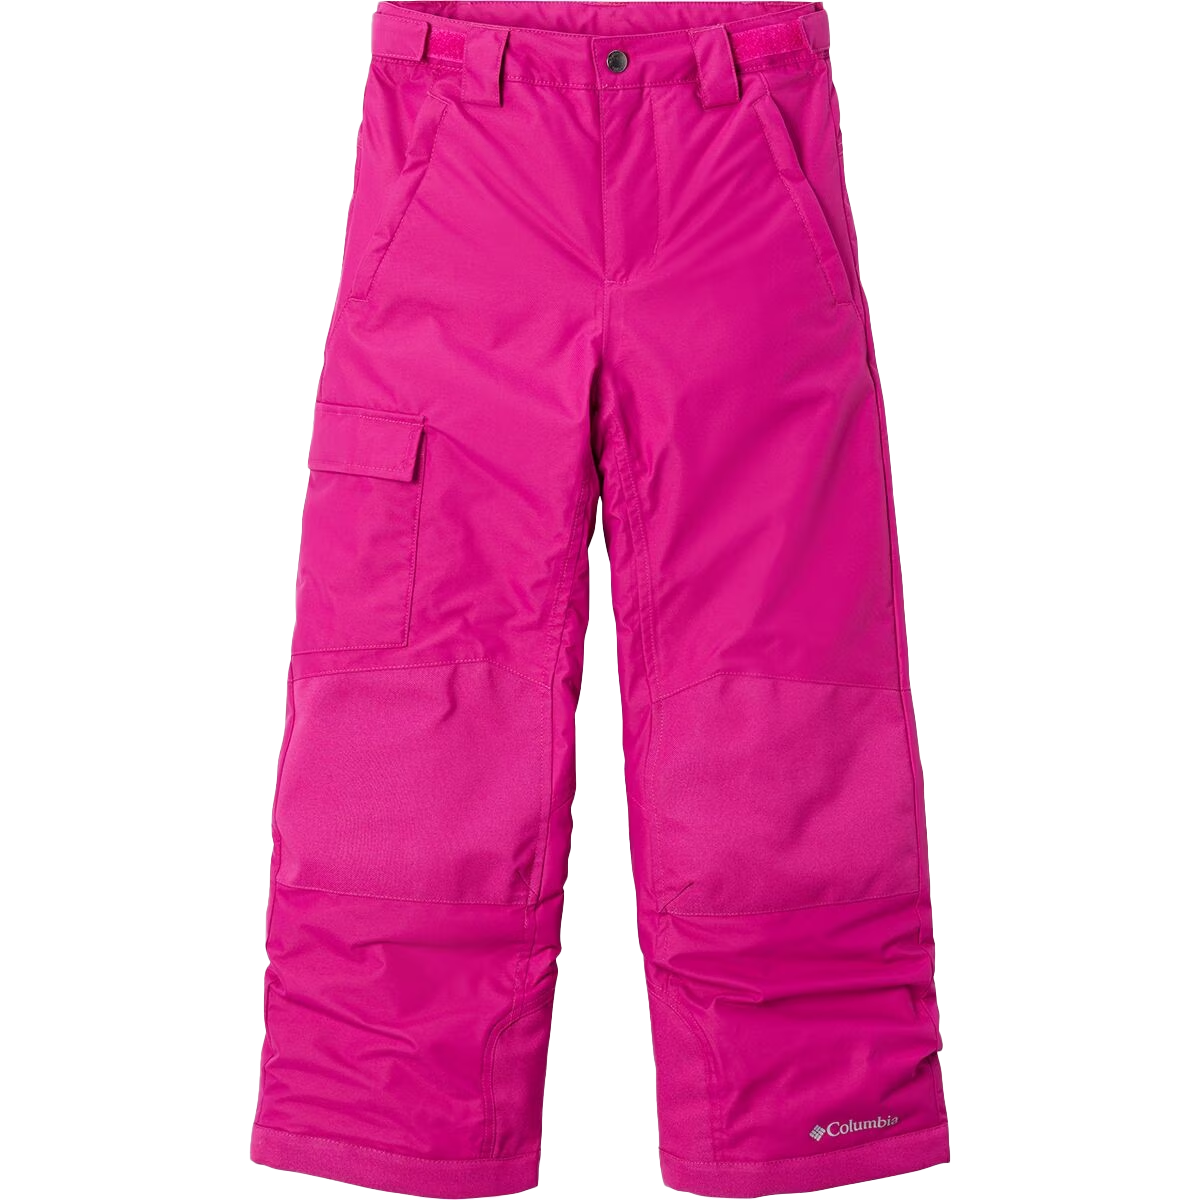 Youth Bugaboo II Pant alternate view